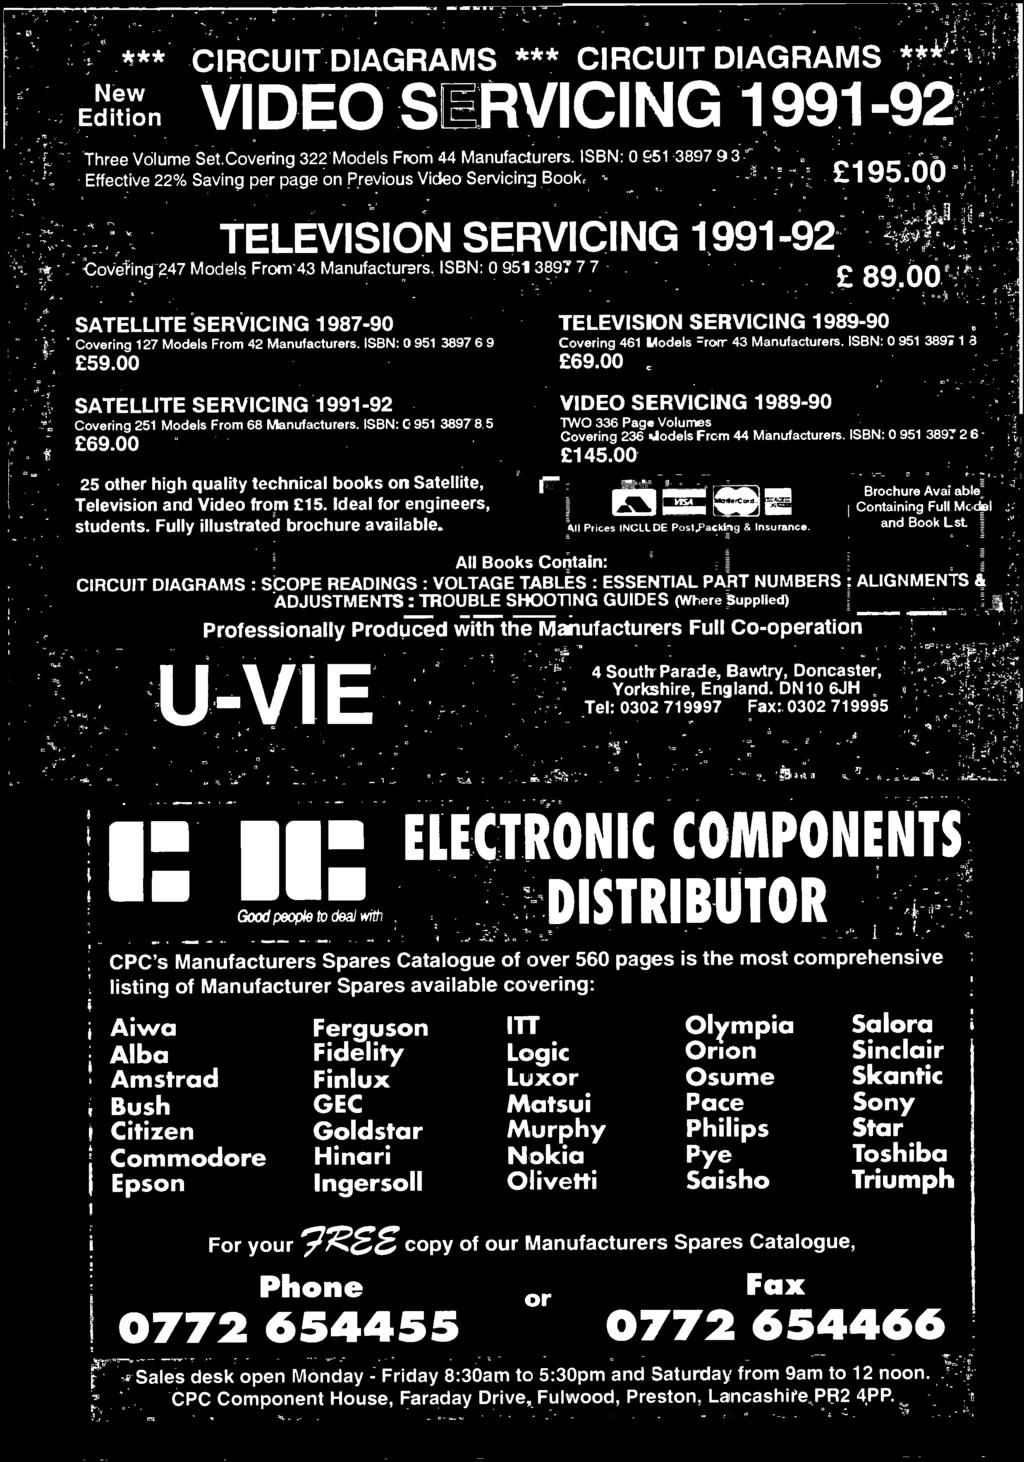 00 TELEVISION SERVICING 1989-90 Covering 461 Models =rorr 43 Manufacturers. ISBN: 0 951 3897 1 3 69.00 VIDEO SERVICING 1989-90 TVVO 336 Page Volumes Covering 236.Jodels Frcm 44 Manufacturers.